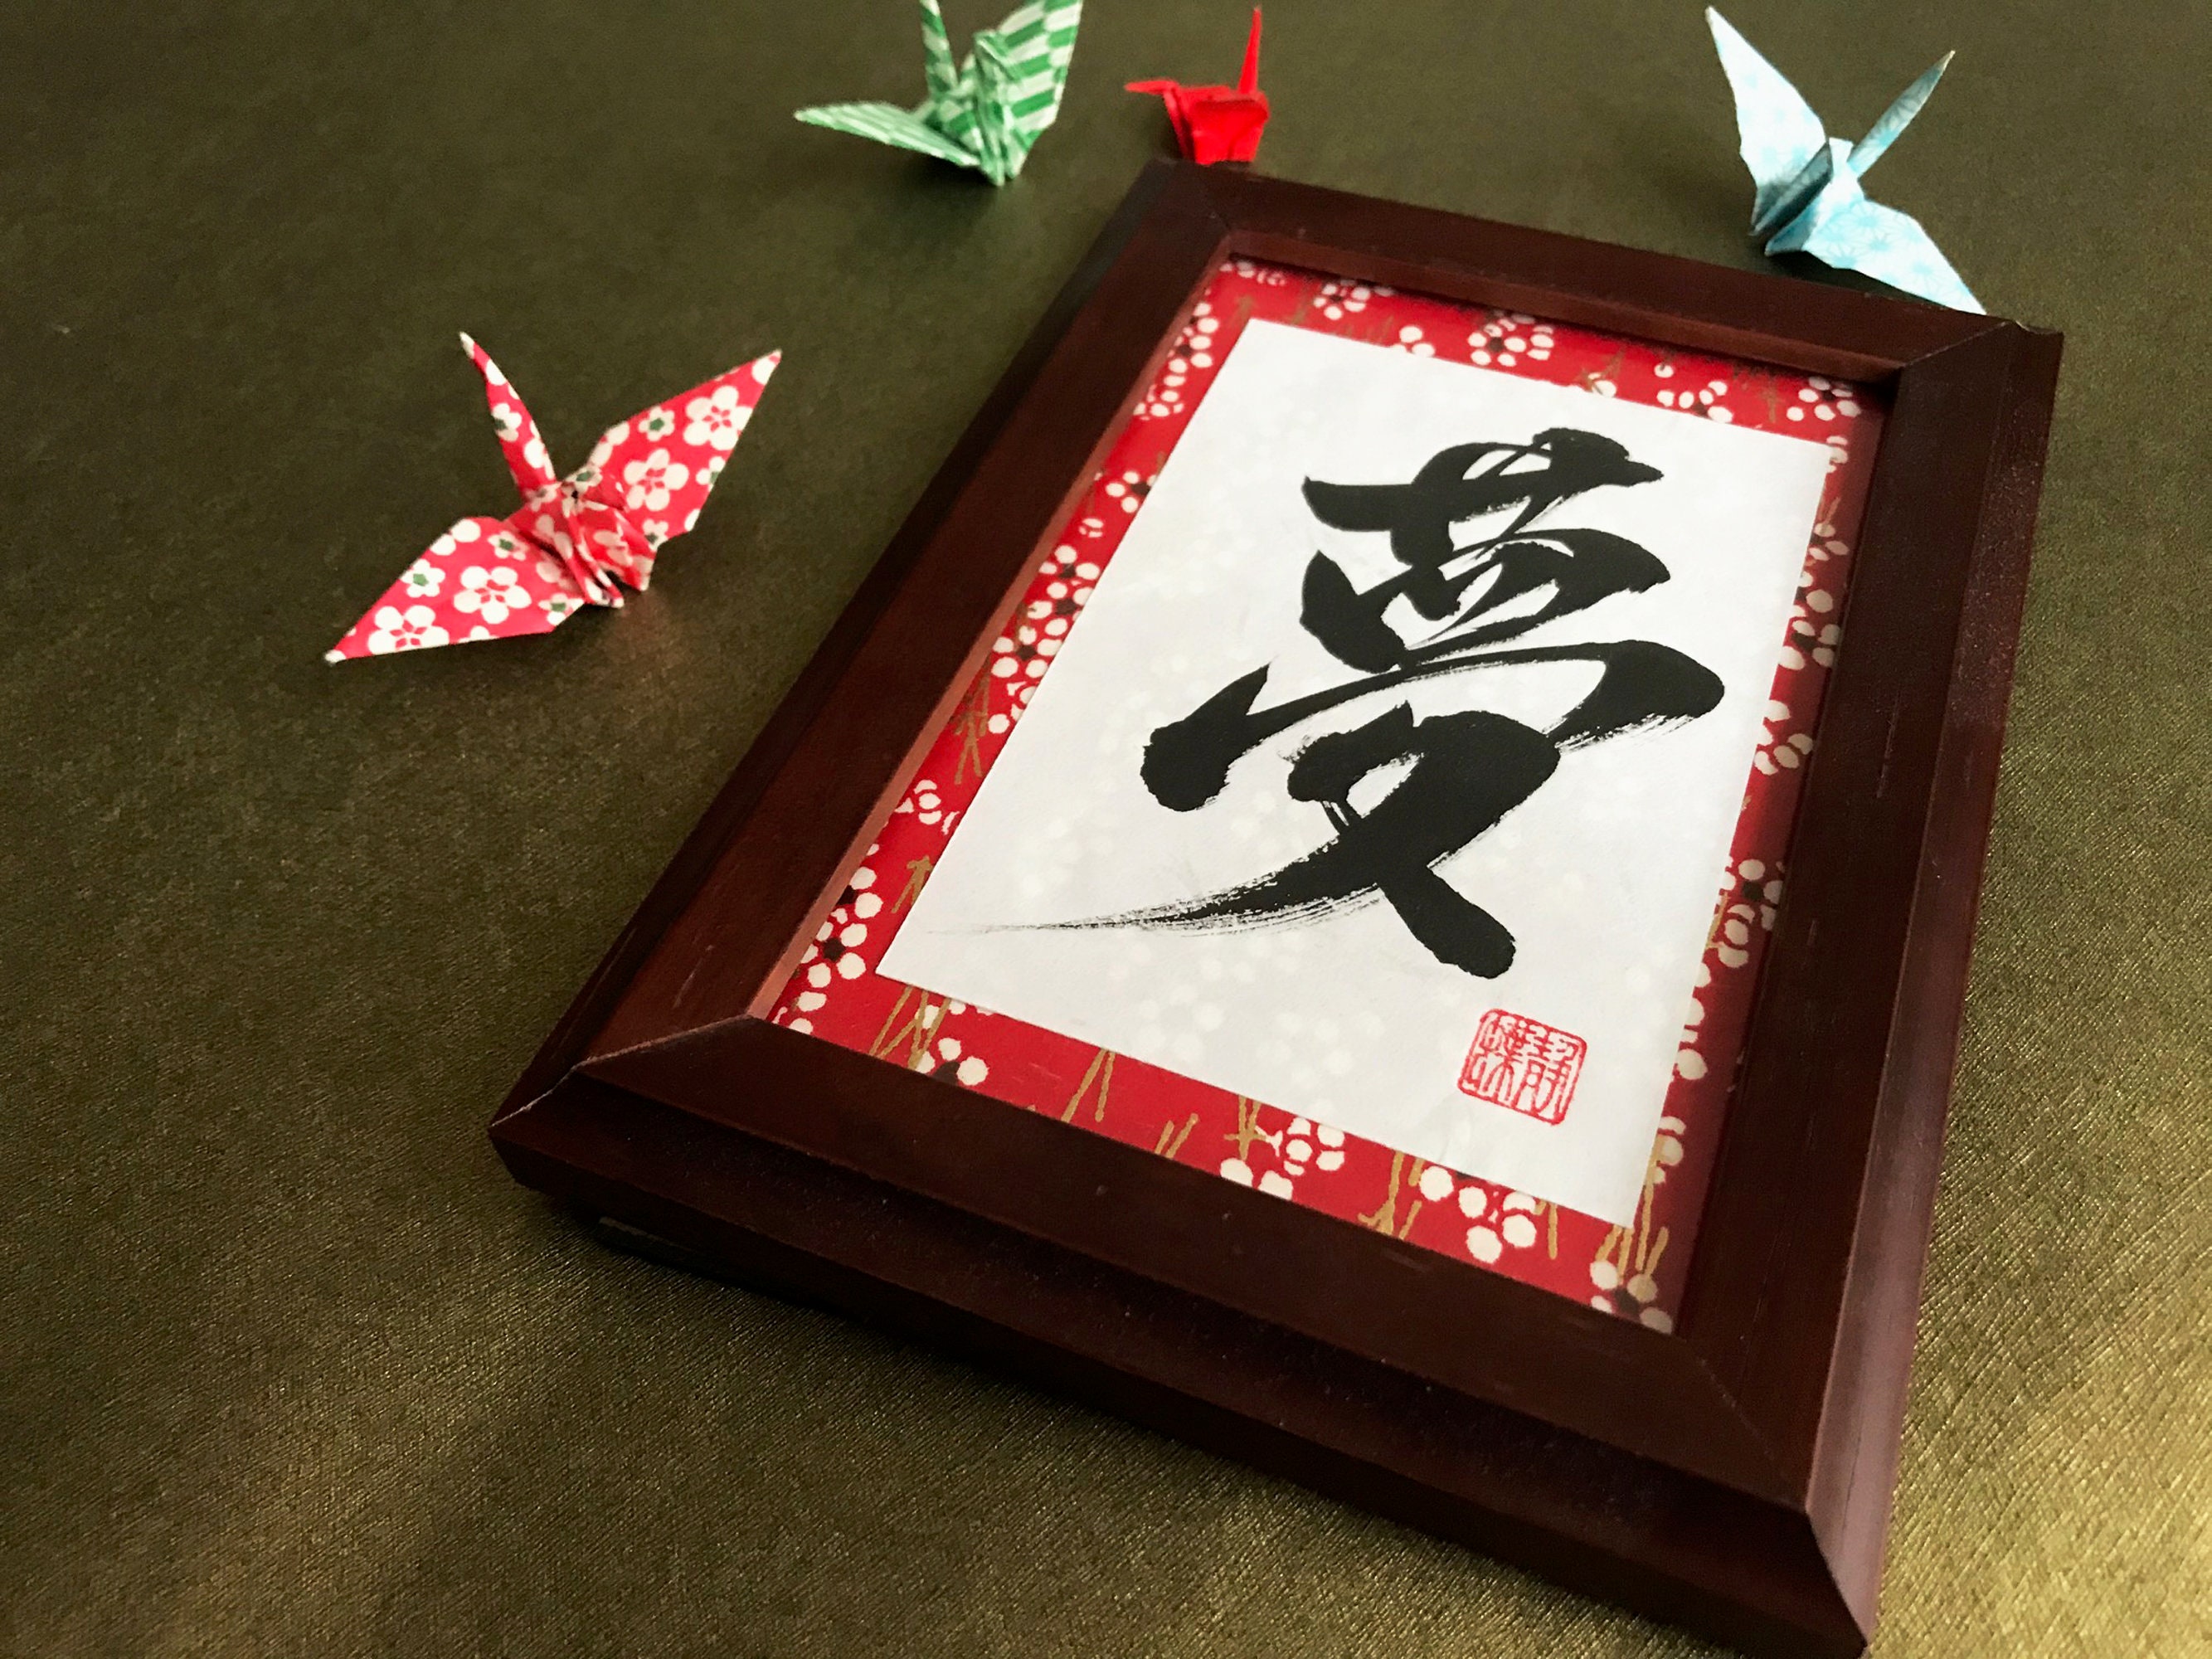 Dream 夢 Japanese Kanji Calligraphy Art With Brown Wooden Frame Etsy